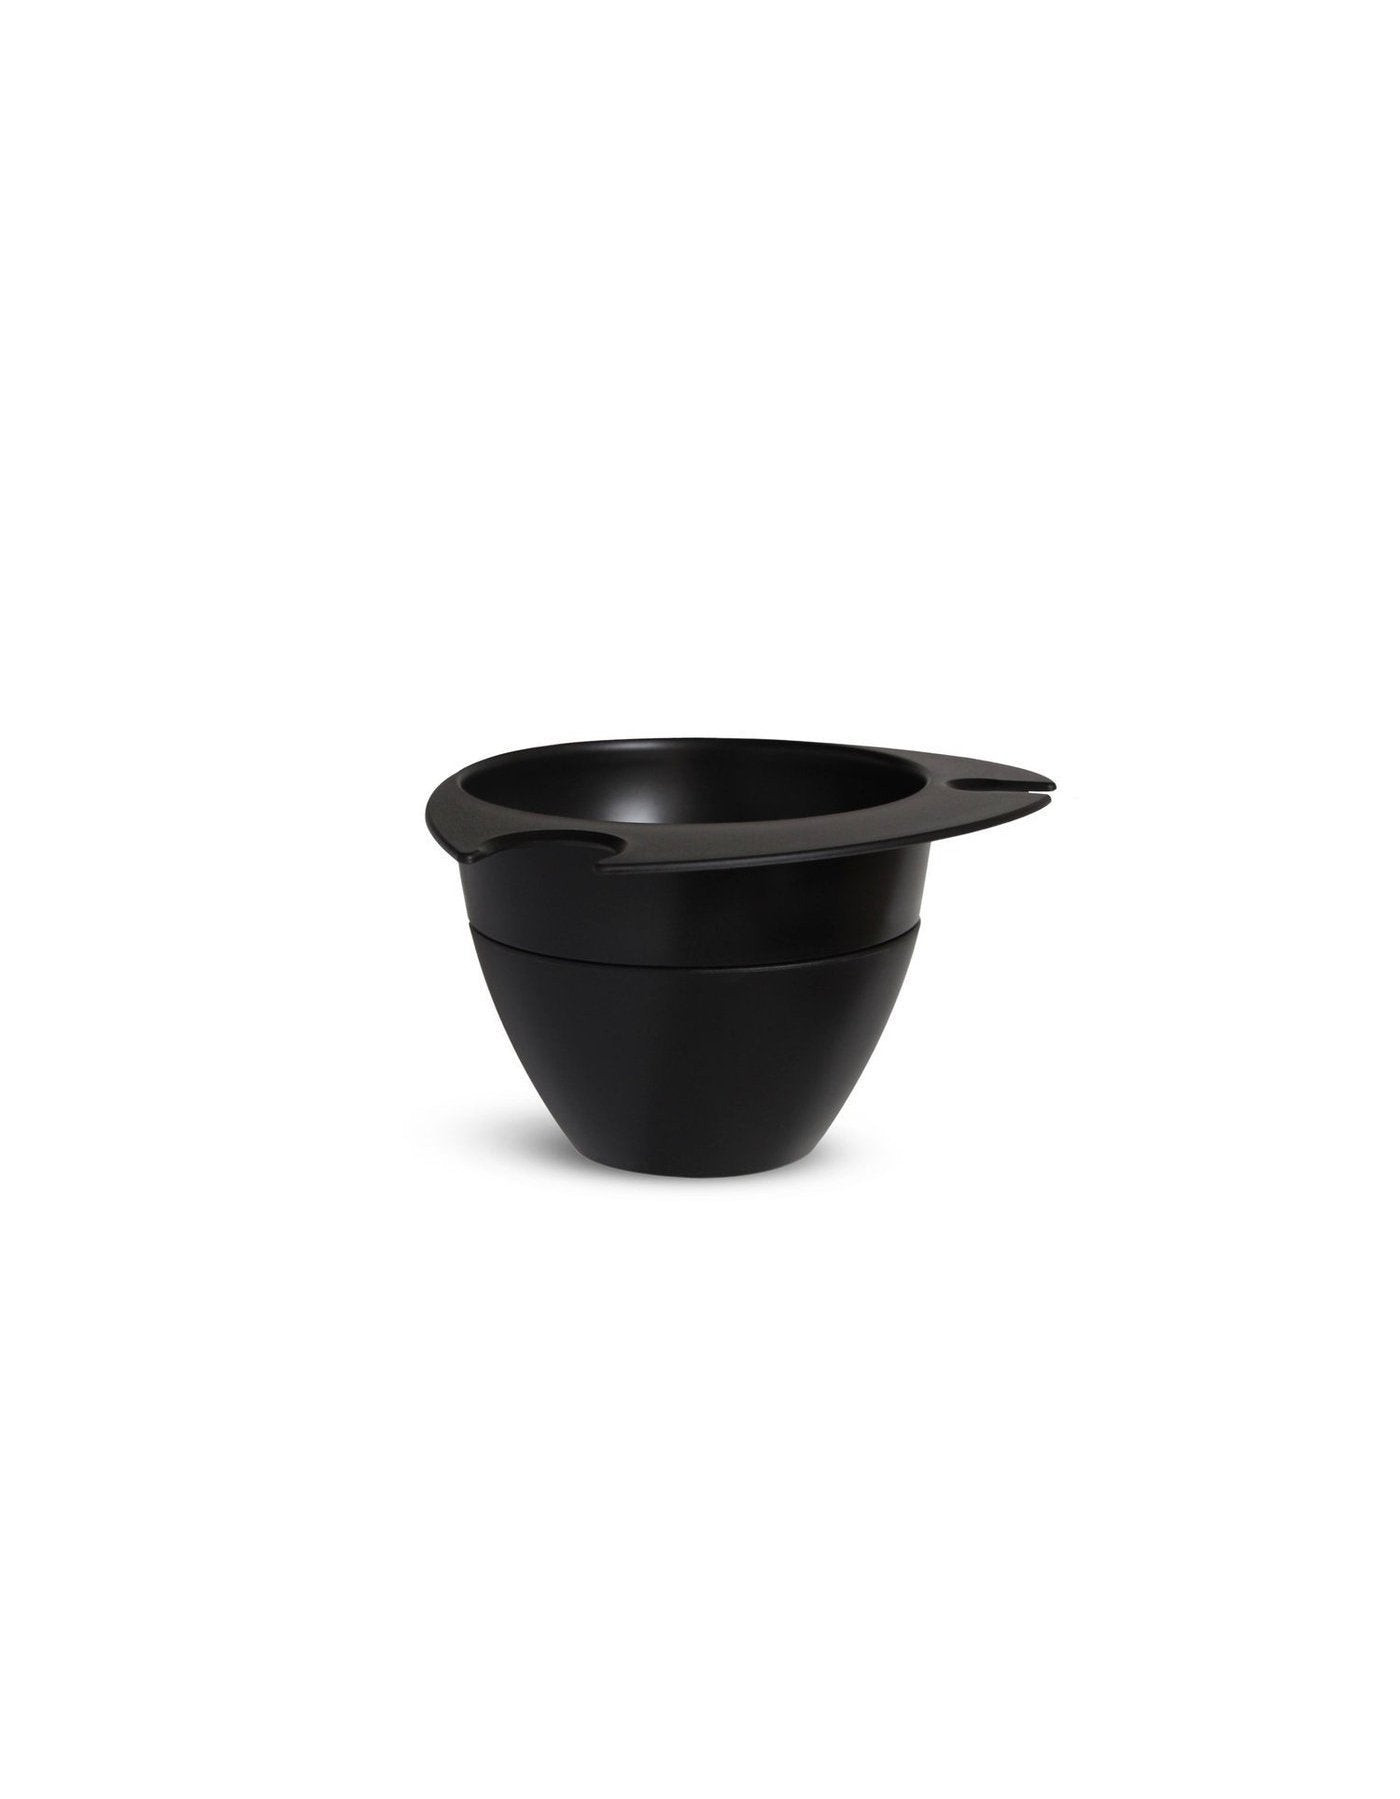 Product image 1 for Shavebowl Lather Bowl, Black